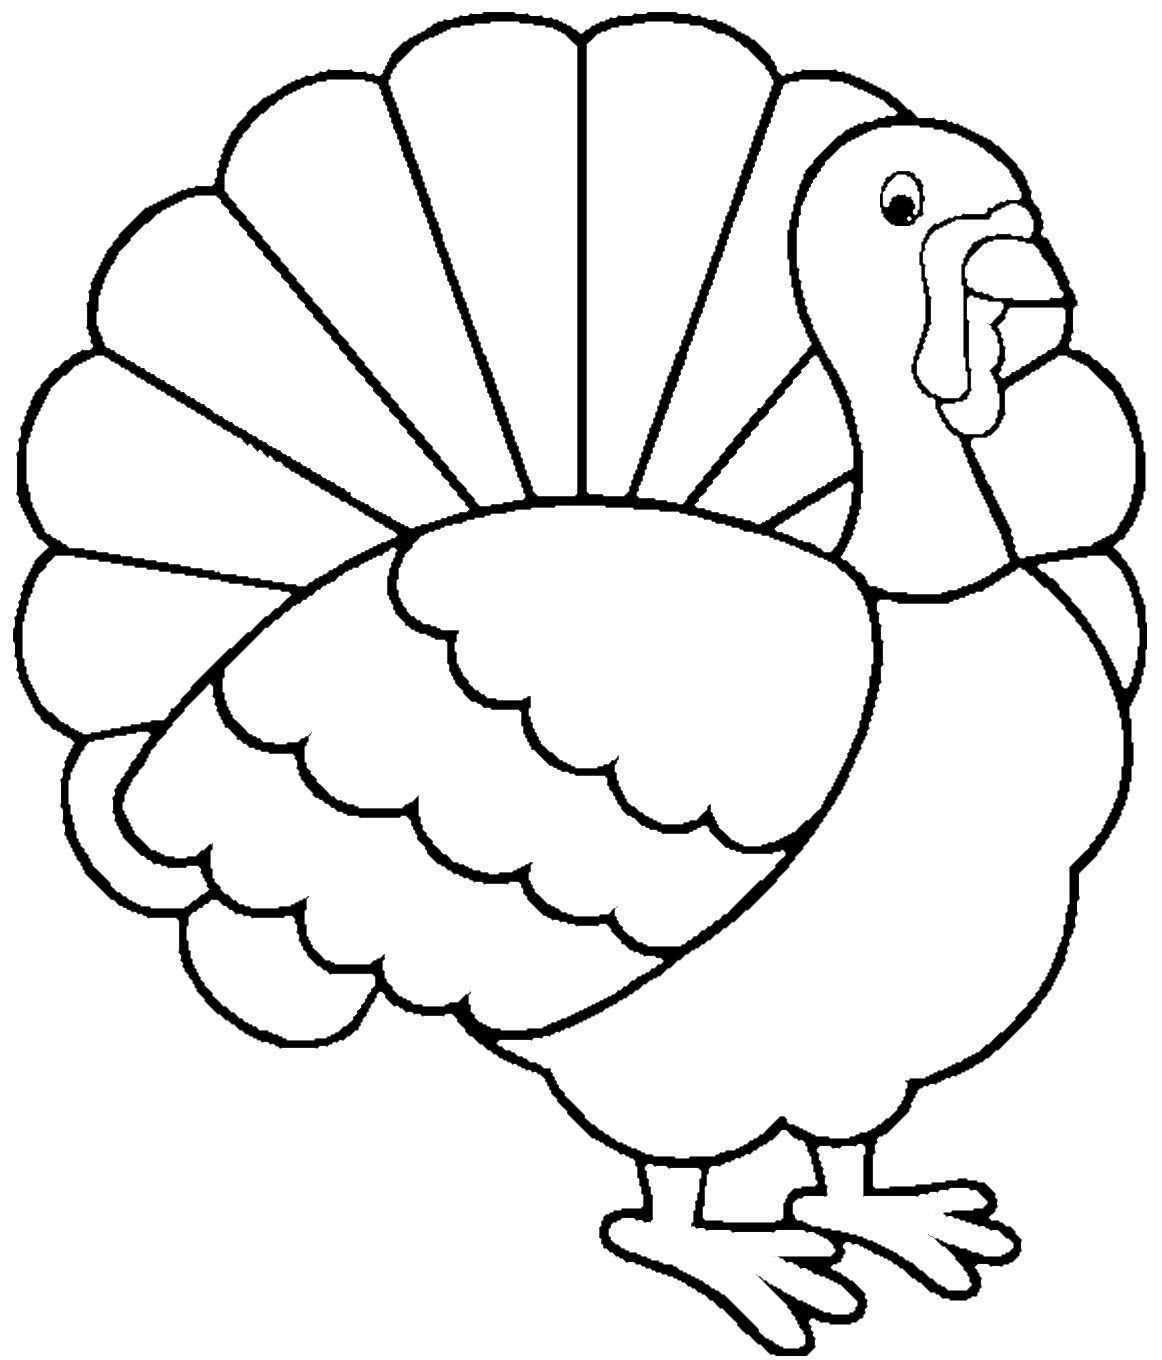 Turkey Coloring Page - Free Large Images | Adult And Children&amp;#039;s - Free Printable Pictures Of Turkeys To Color